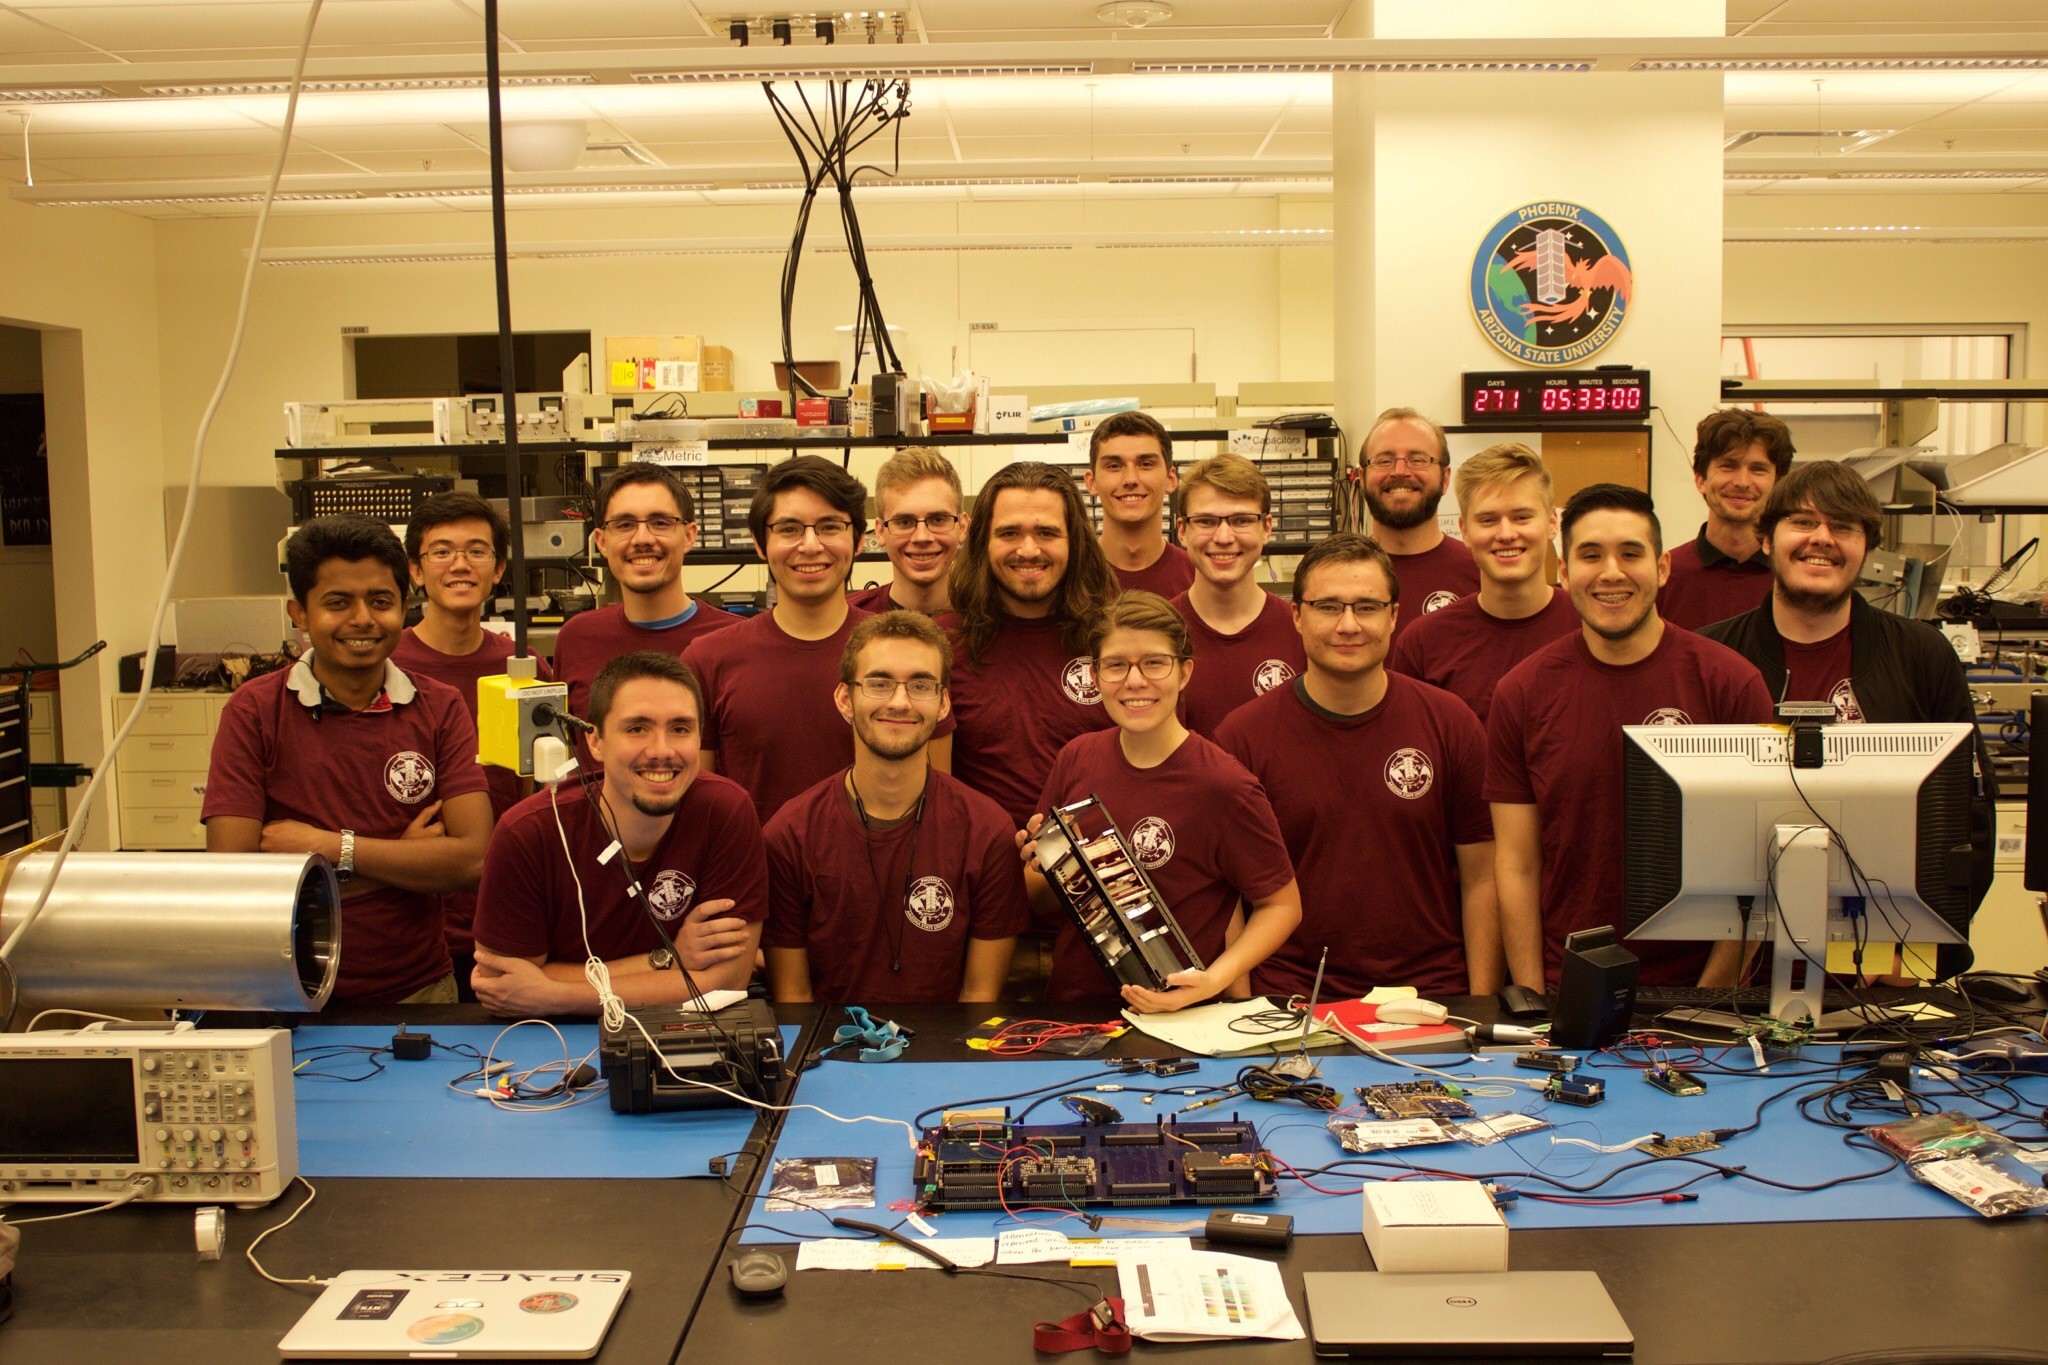 A group photo of multiple students all wearing maroon shirts. In front of them is a table with electronics on it.